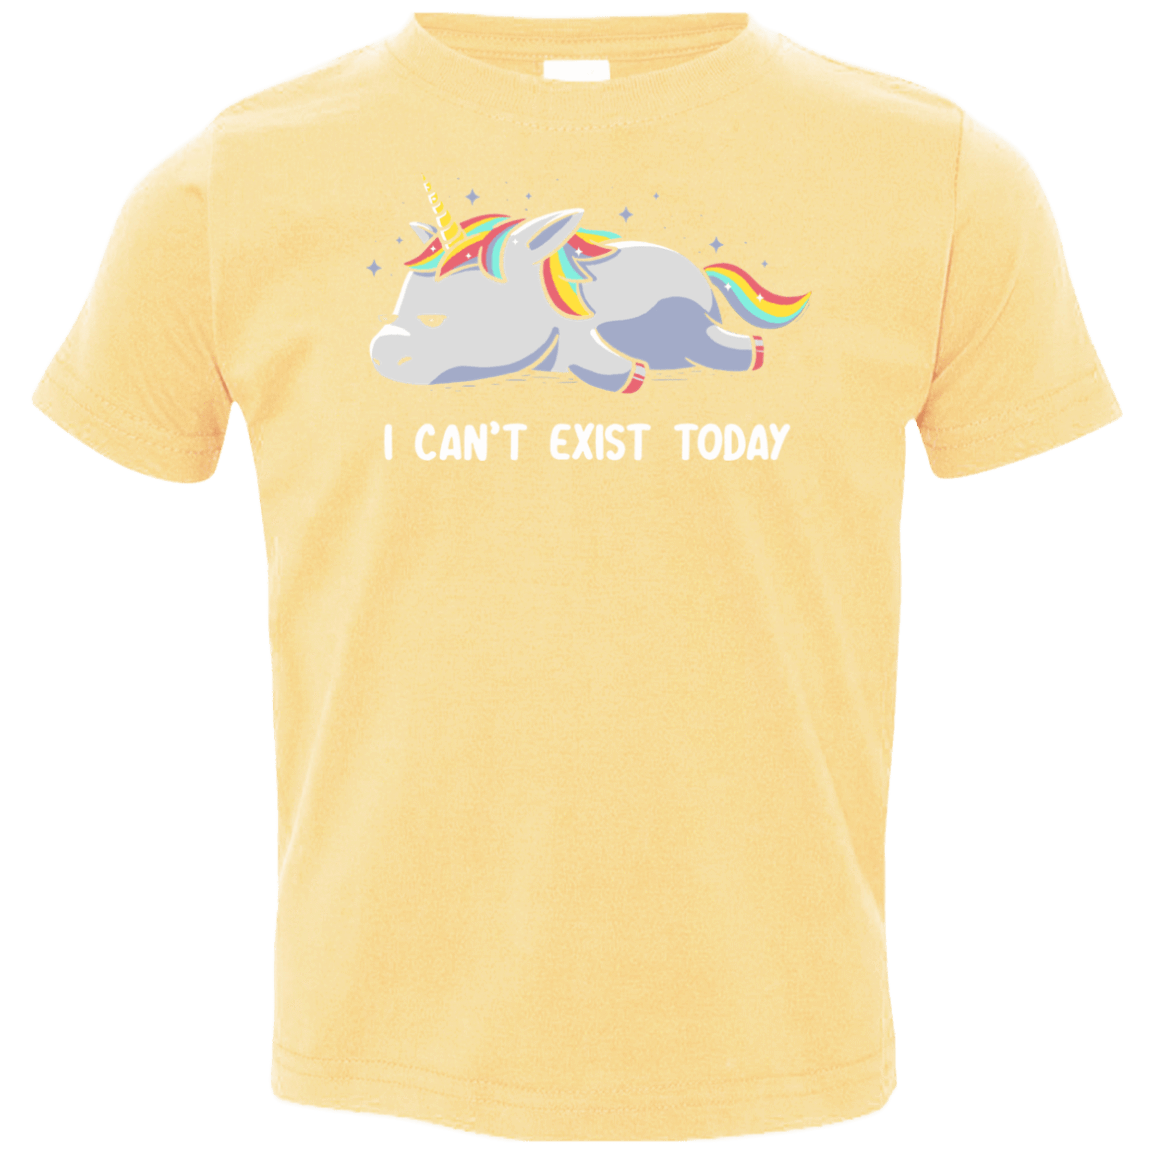 T-Shirts Butter / 2T I Can't Exist Today Toddler Premium T-Shirt